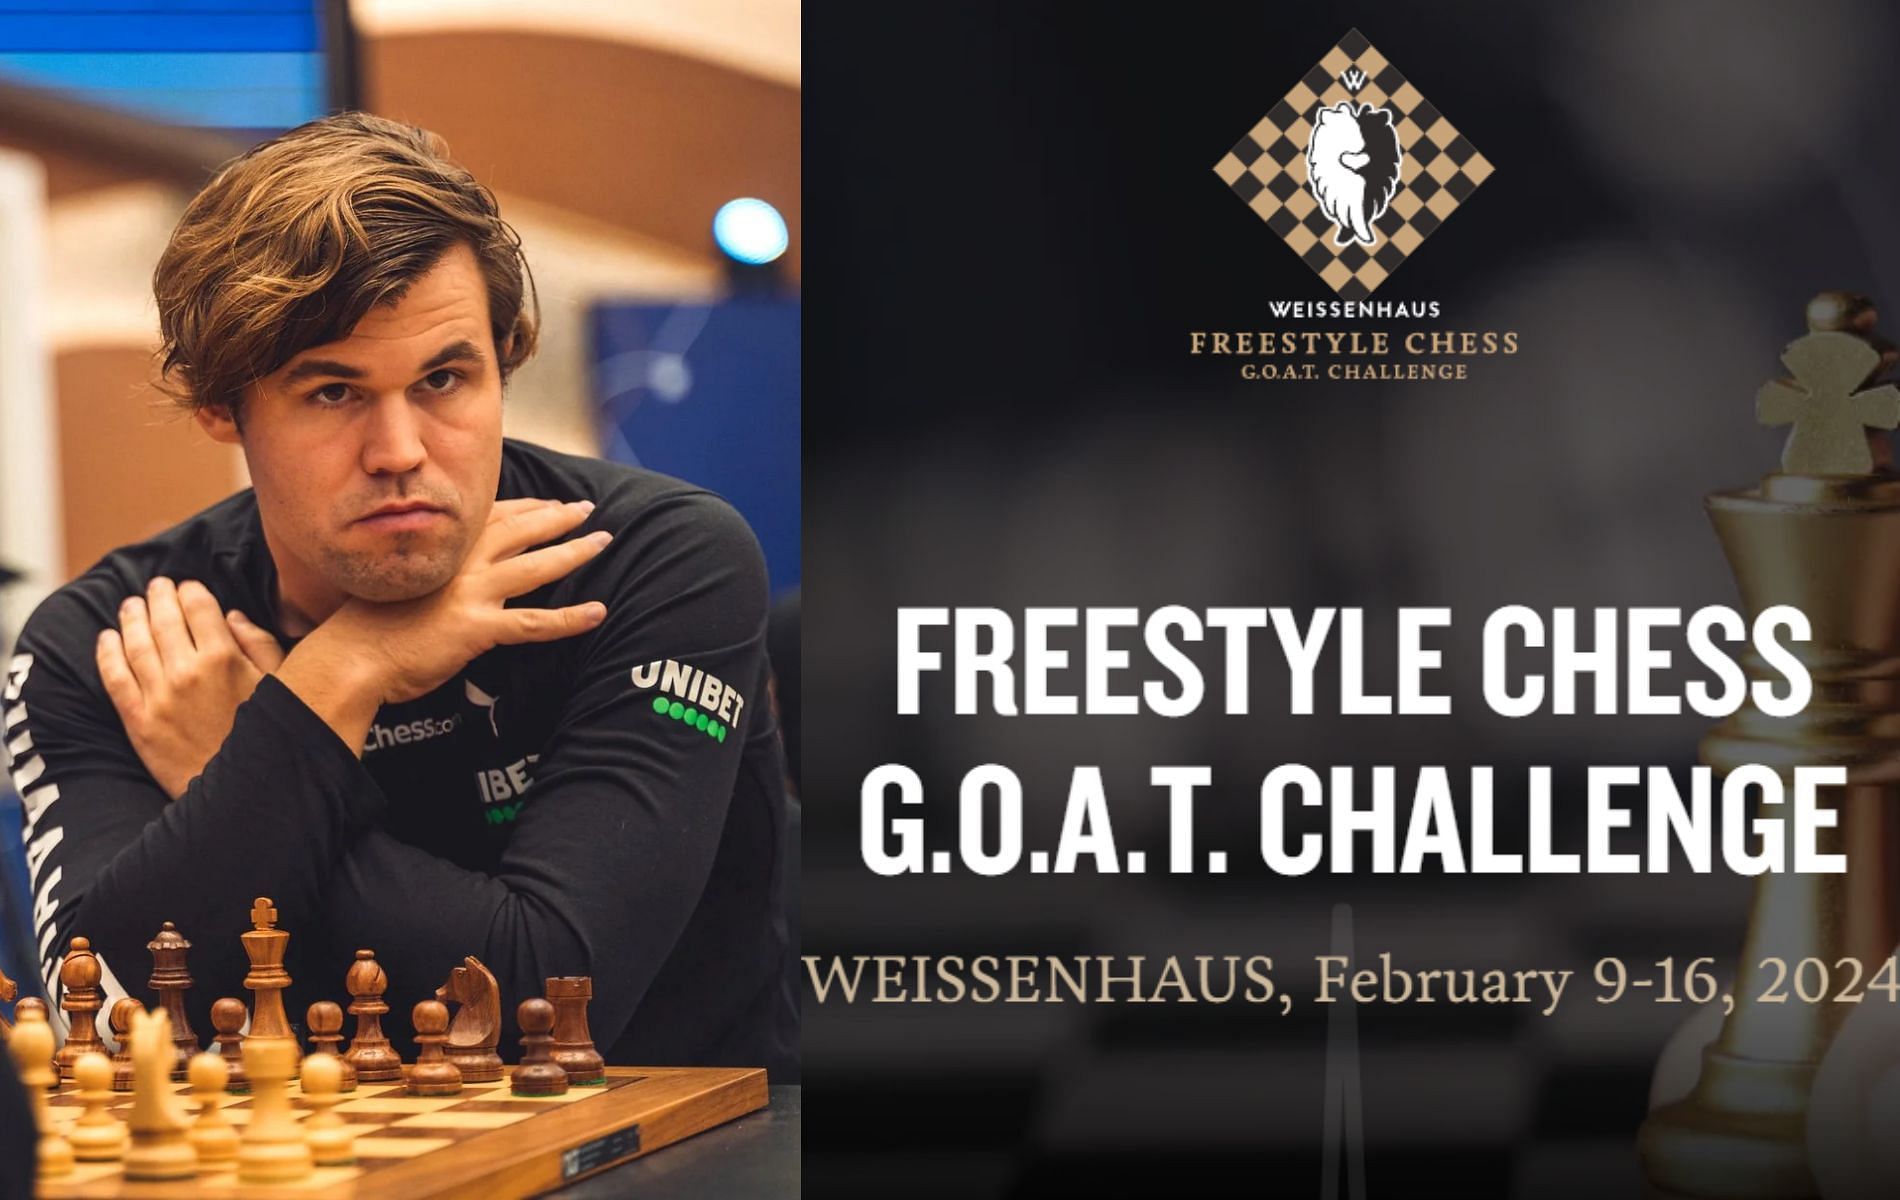 Magnus Carlsen announces new Chess tournament (Image via Reddit/r/chess and Freestyle-chess.com)